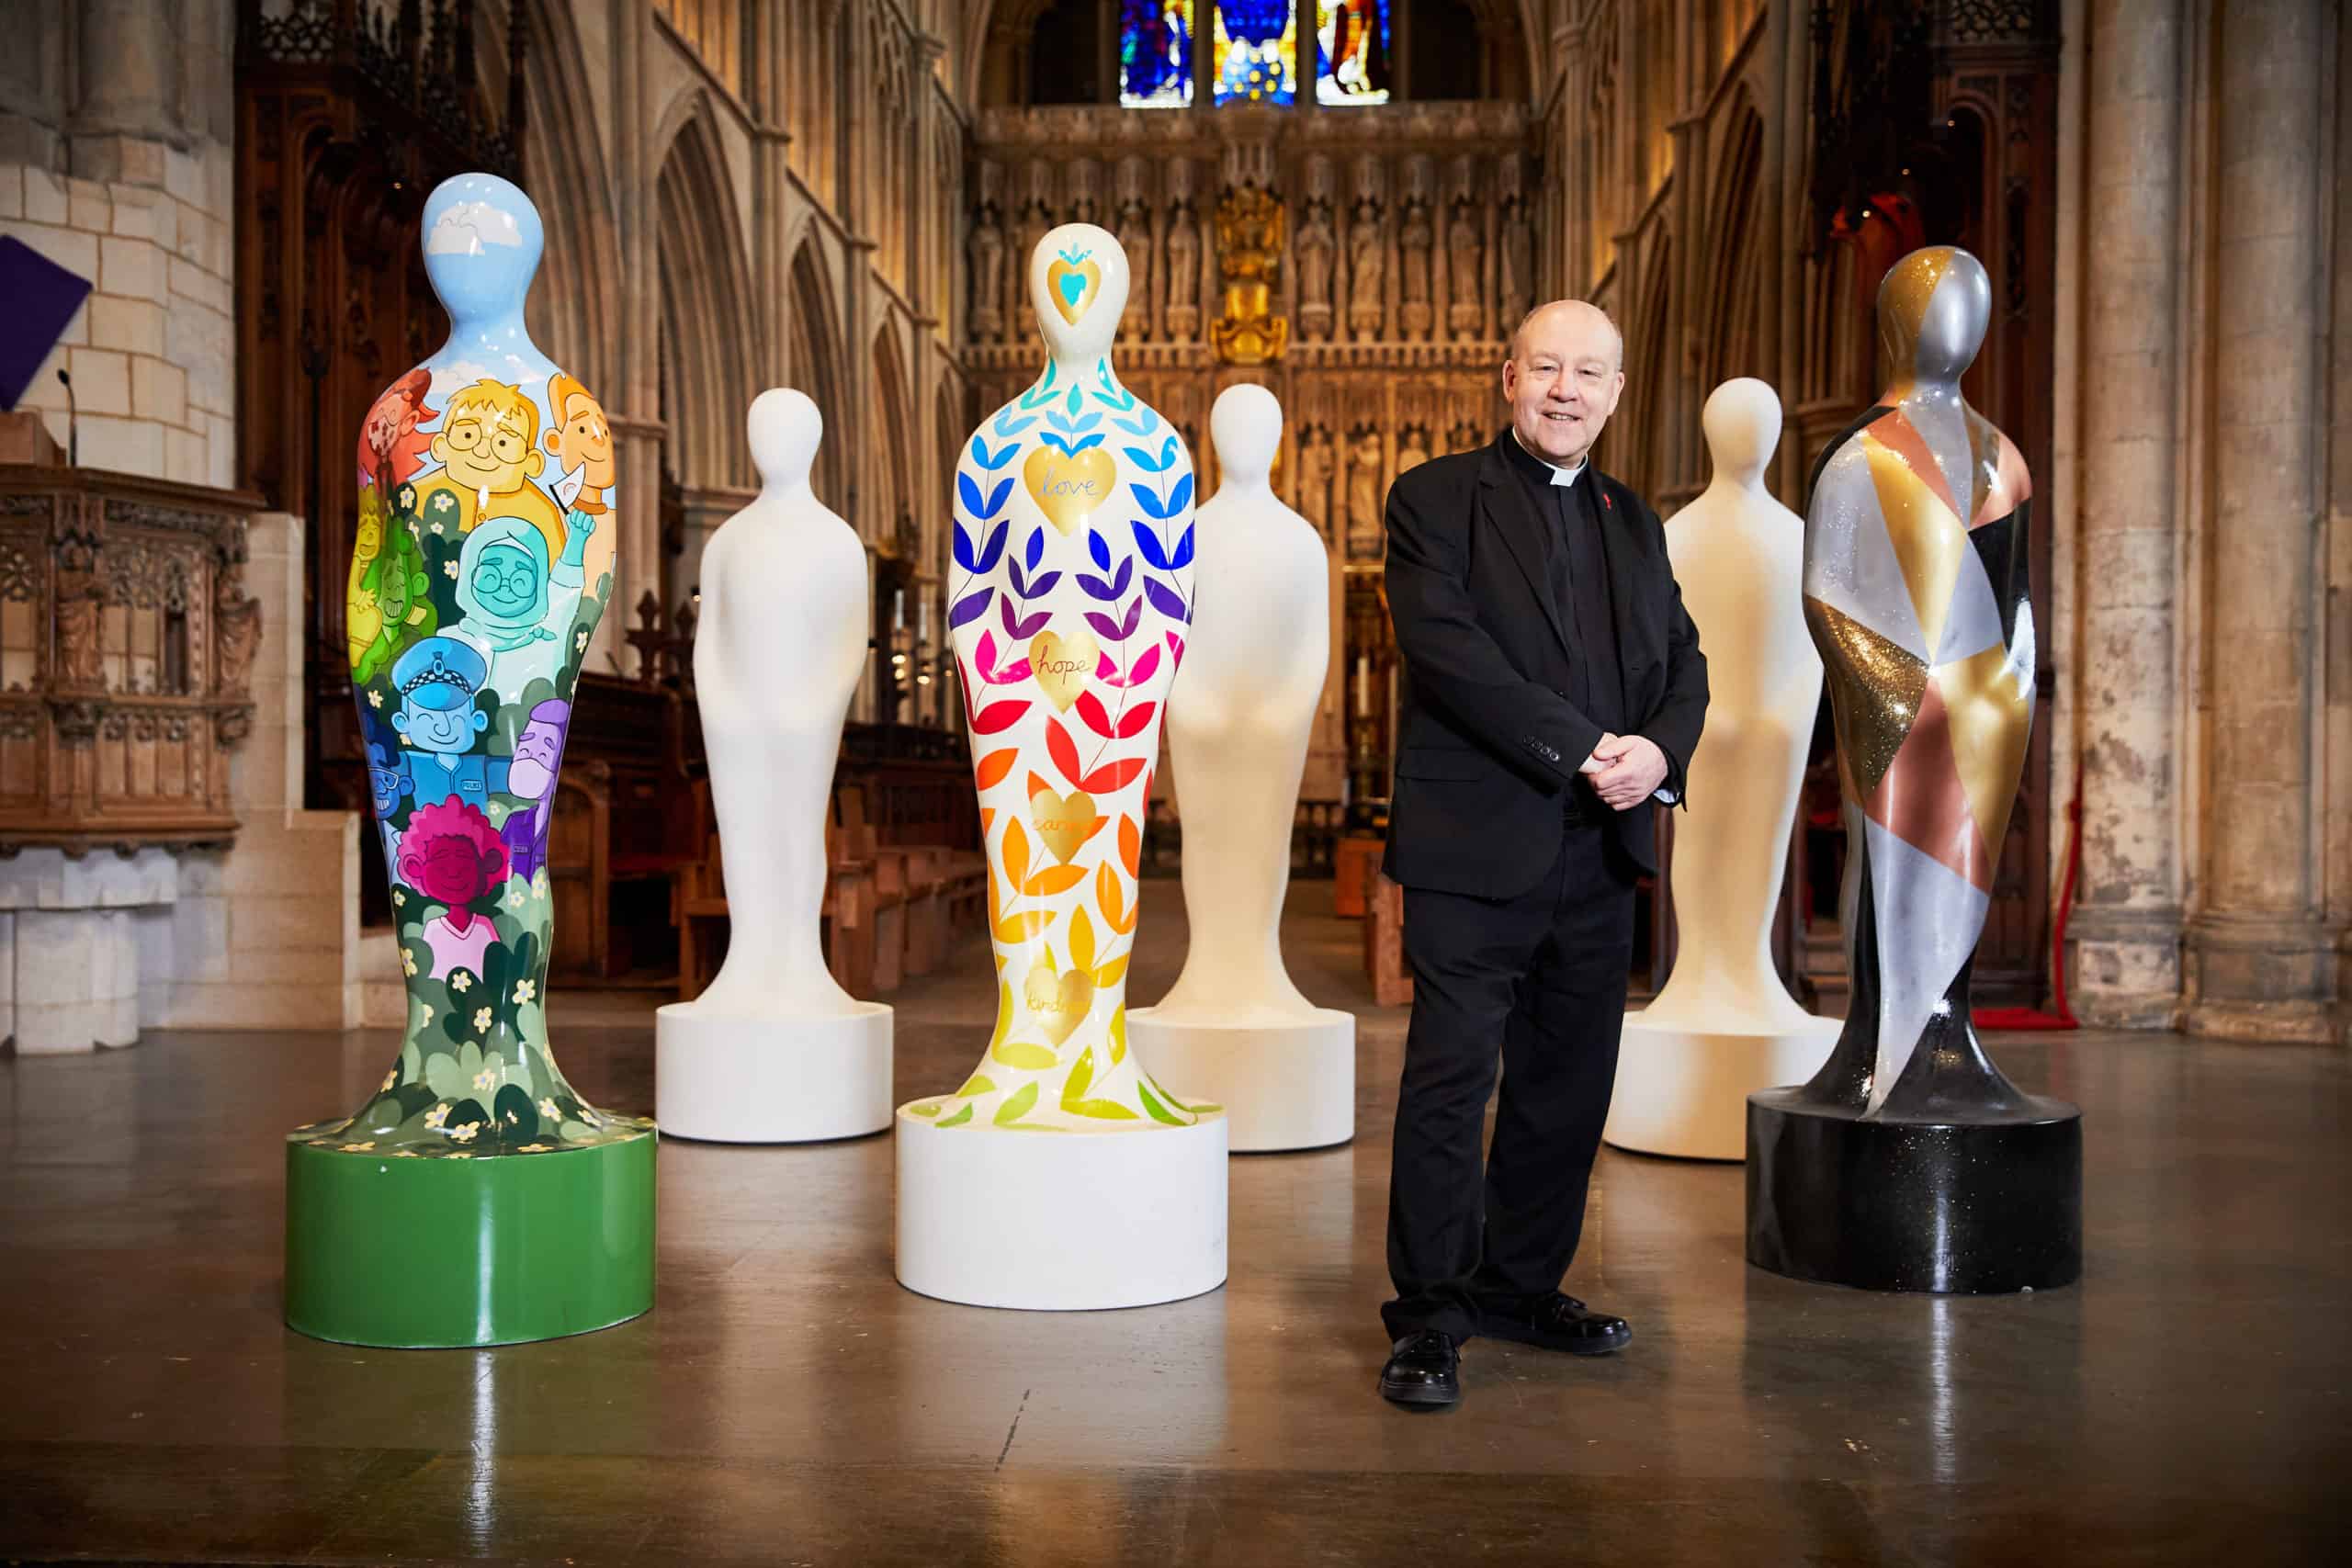 Dean of Southwark Andrew Nunn with the installation (Image: Scott Kershaw Photography)